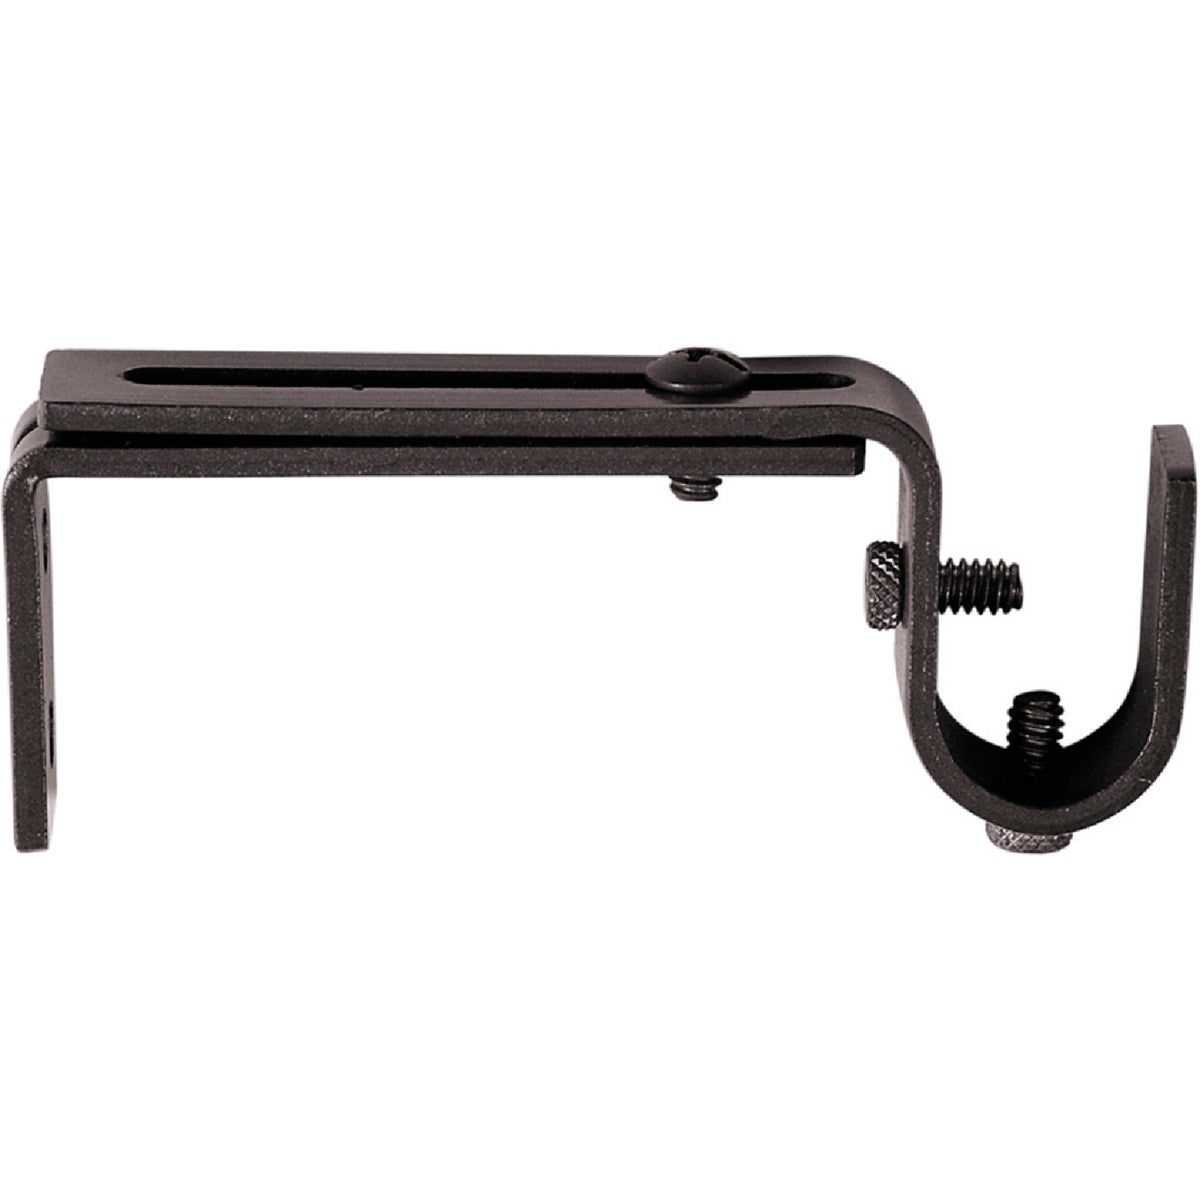 Item 601839, Metal adjustable brackets can be used with any 5/8 In. to 3/4 In.